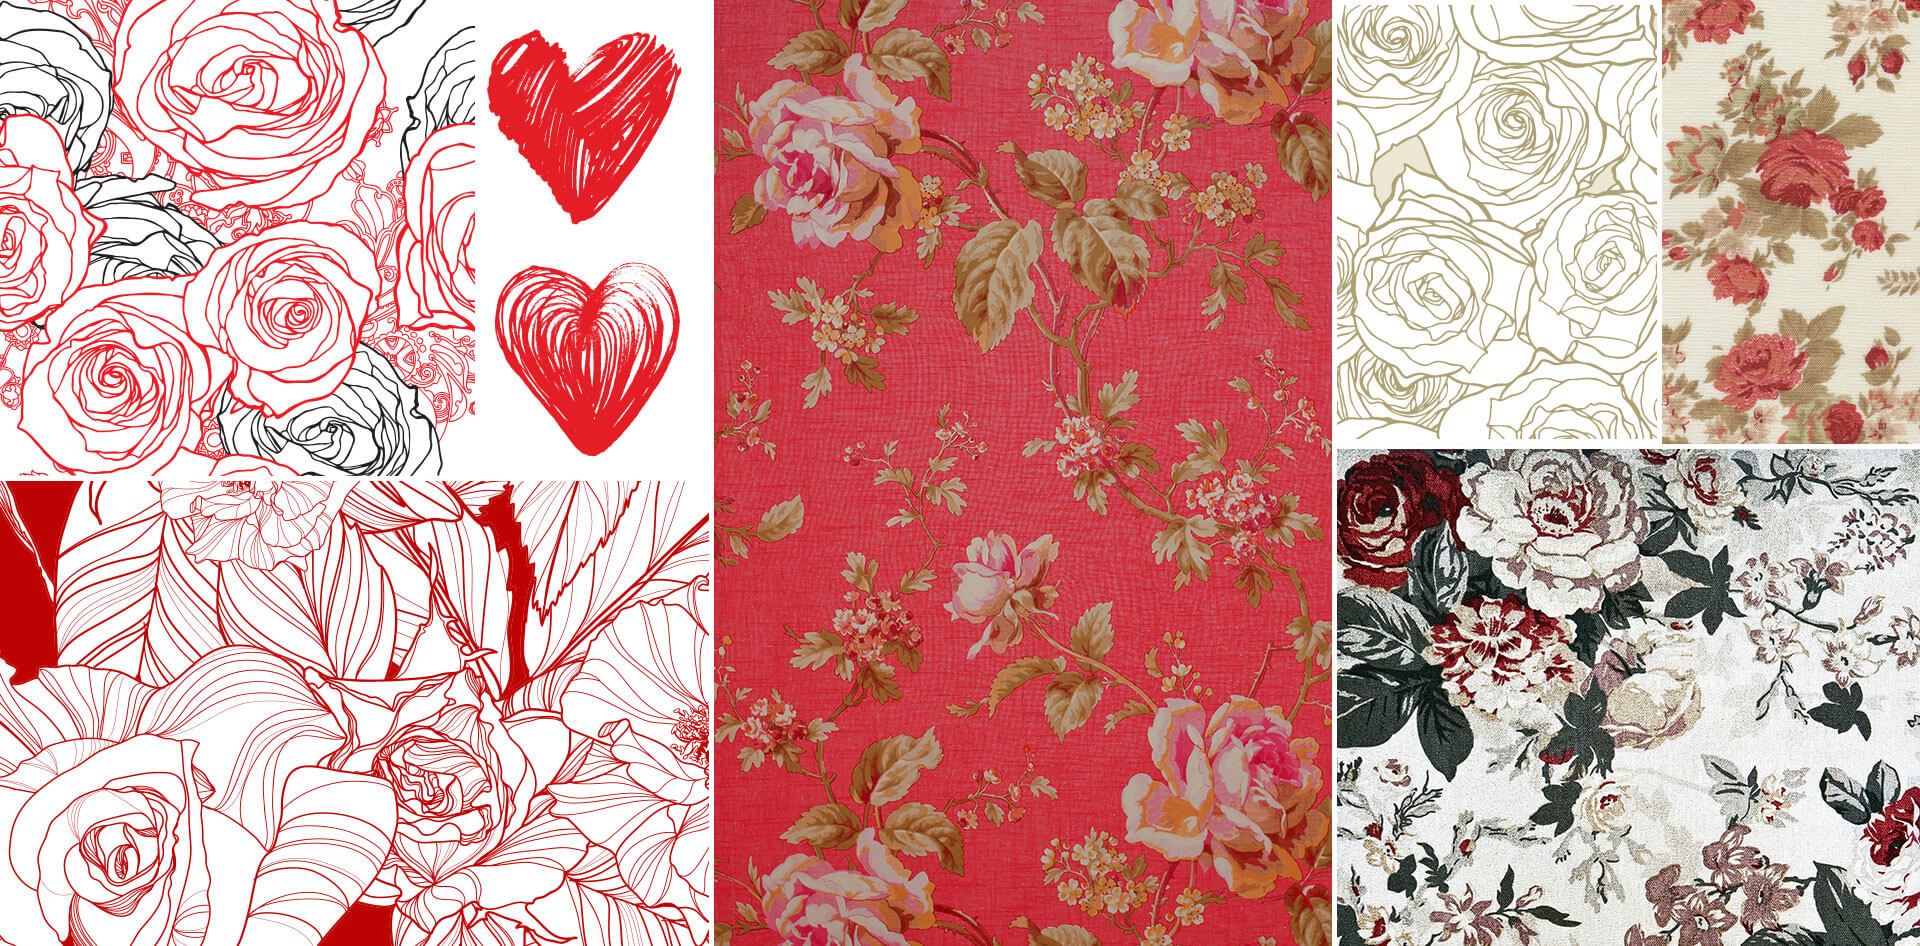 Rose floral pattern inspiration research